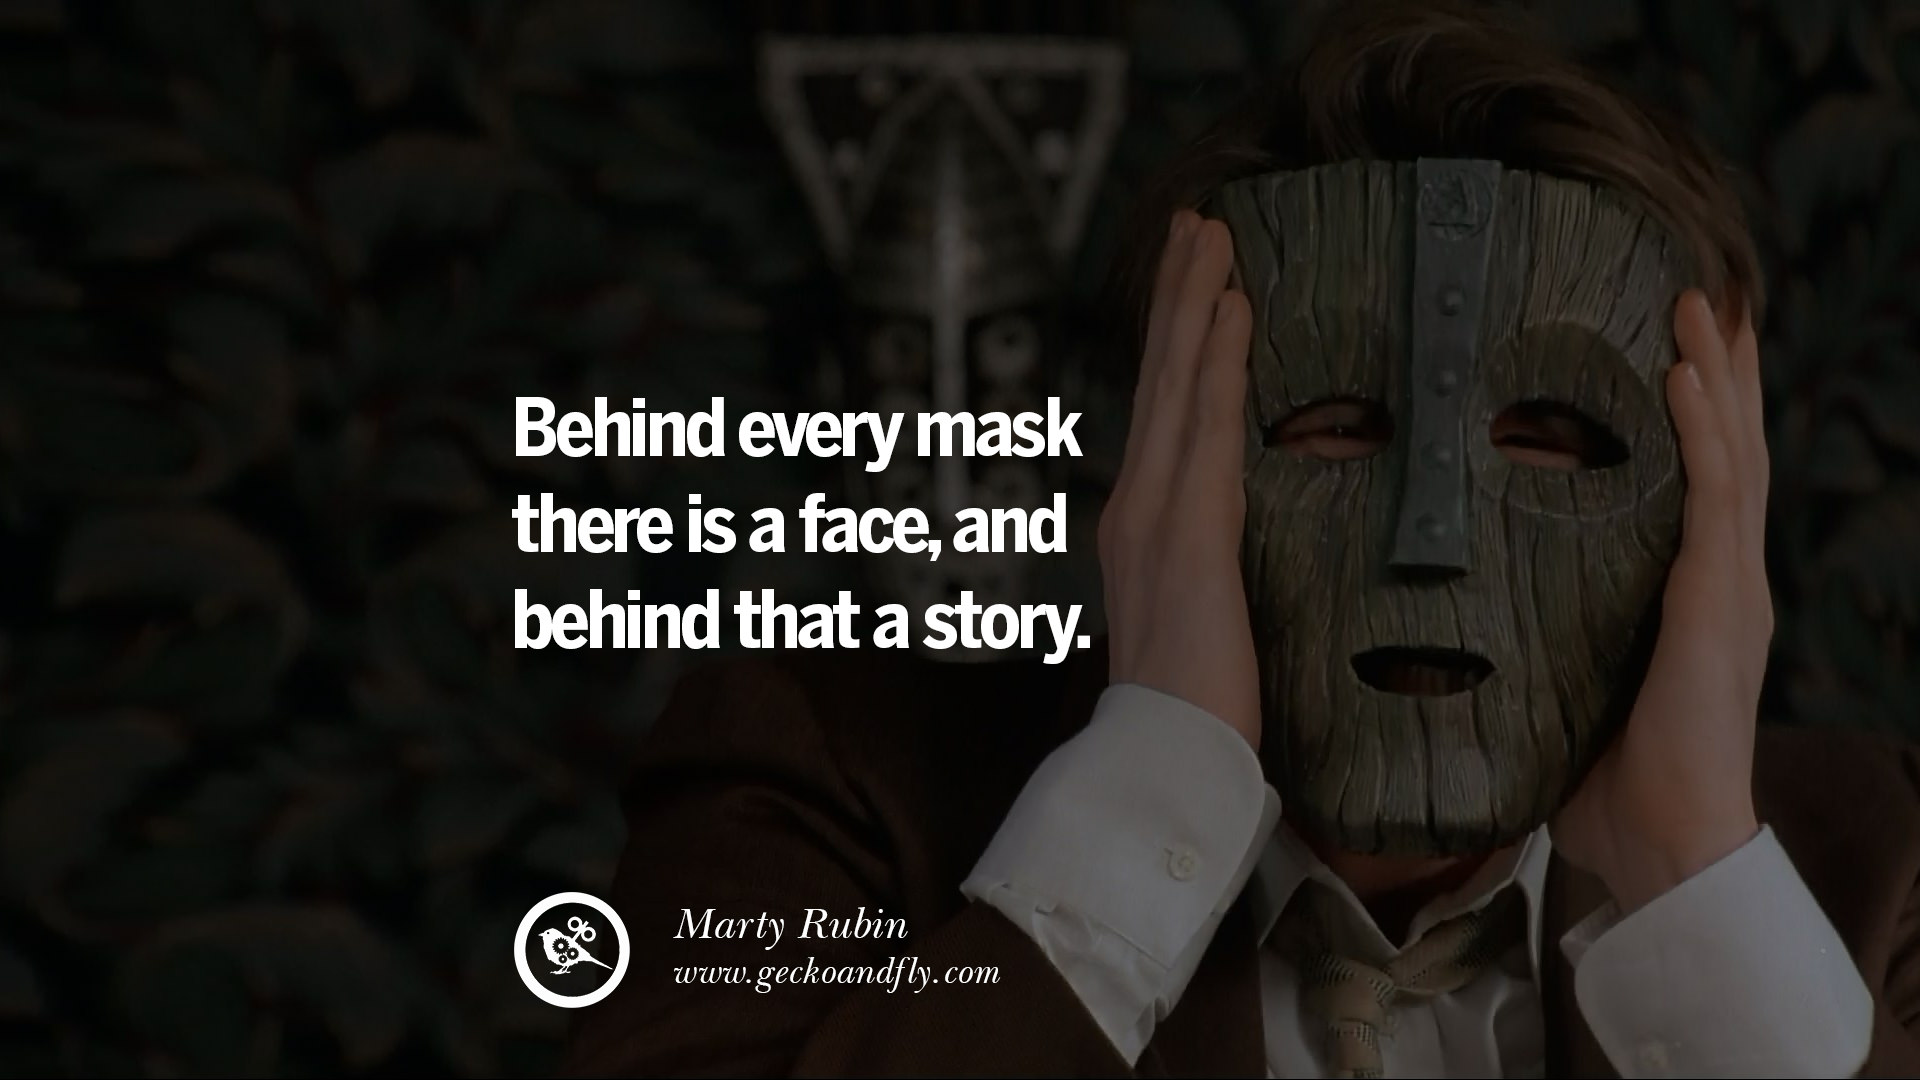 Behind every mask there is a face, and behind that a story ...